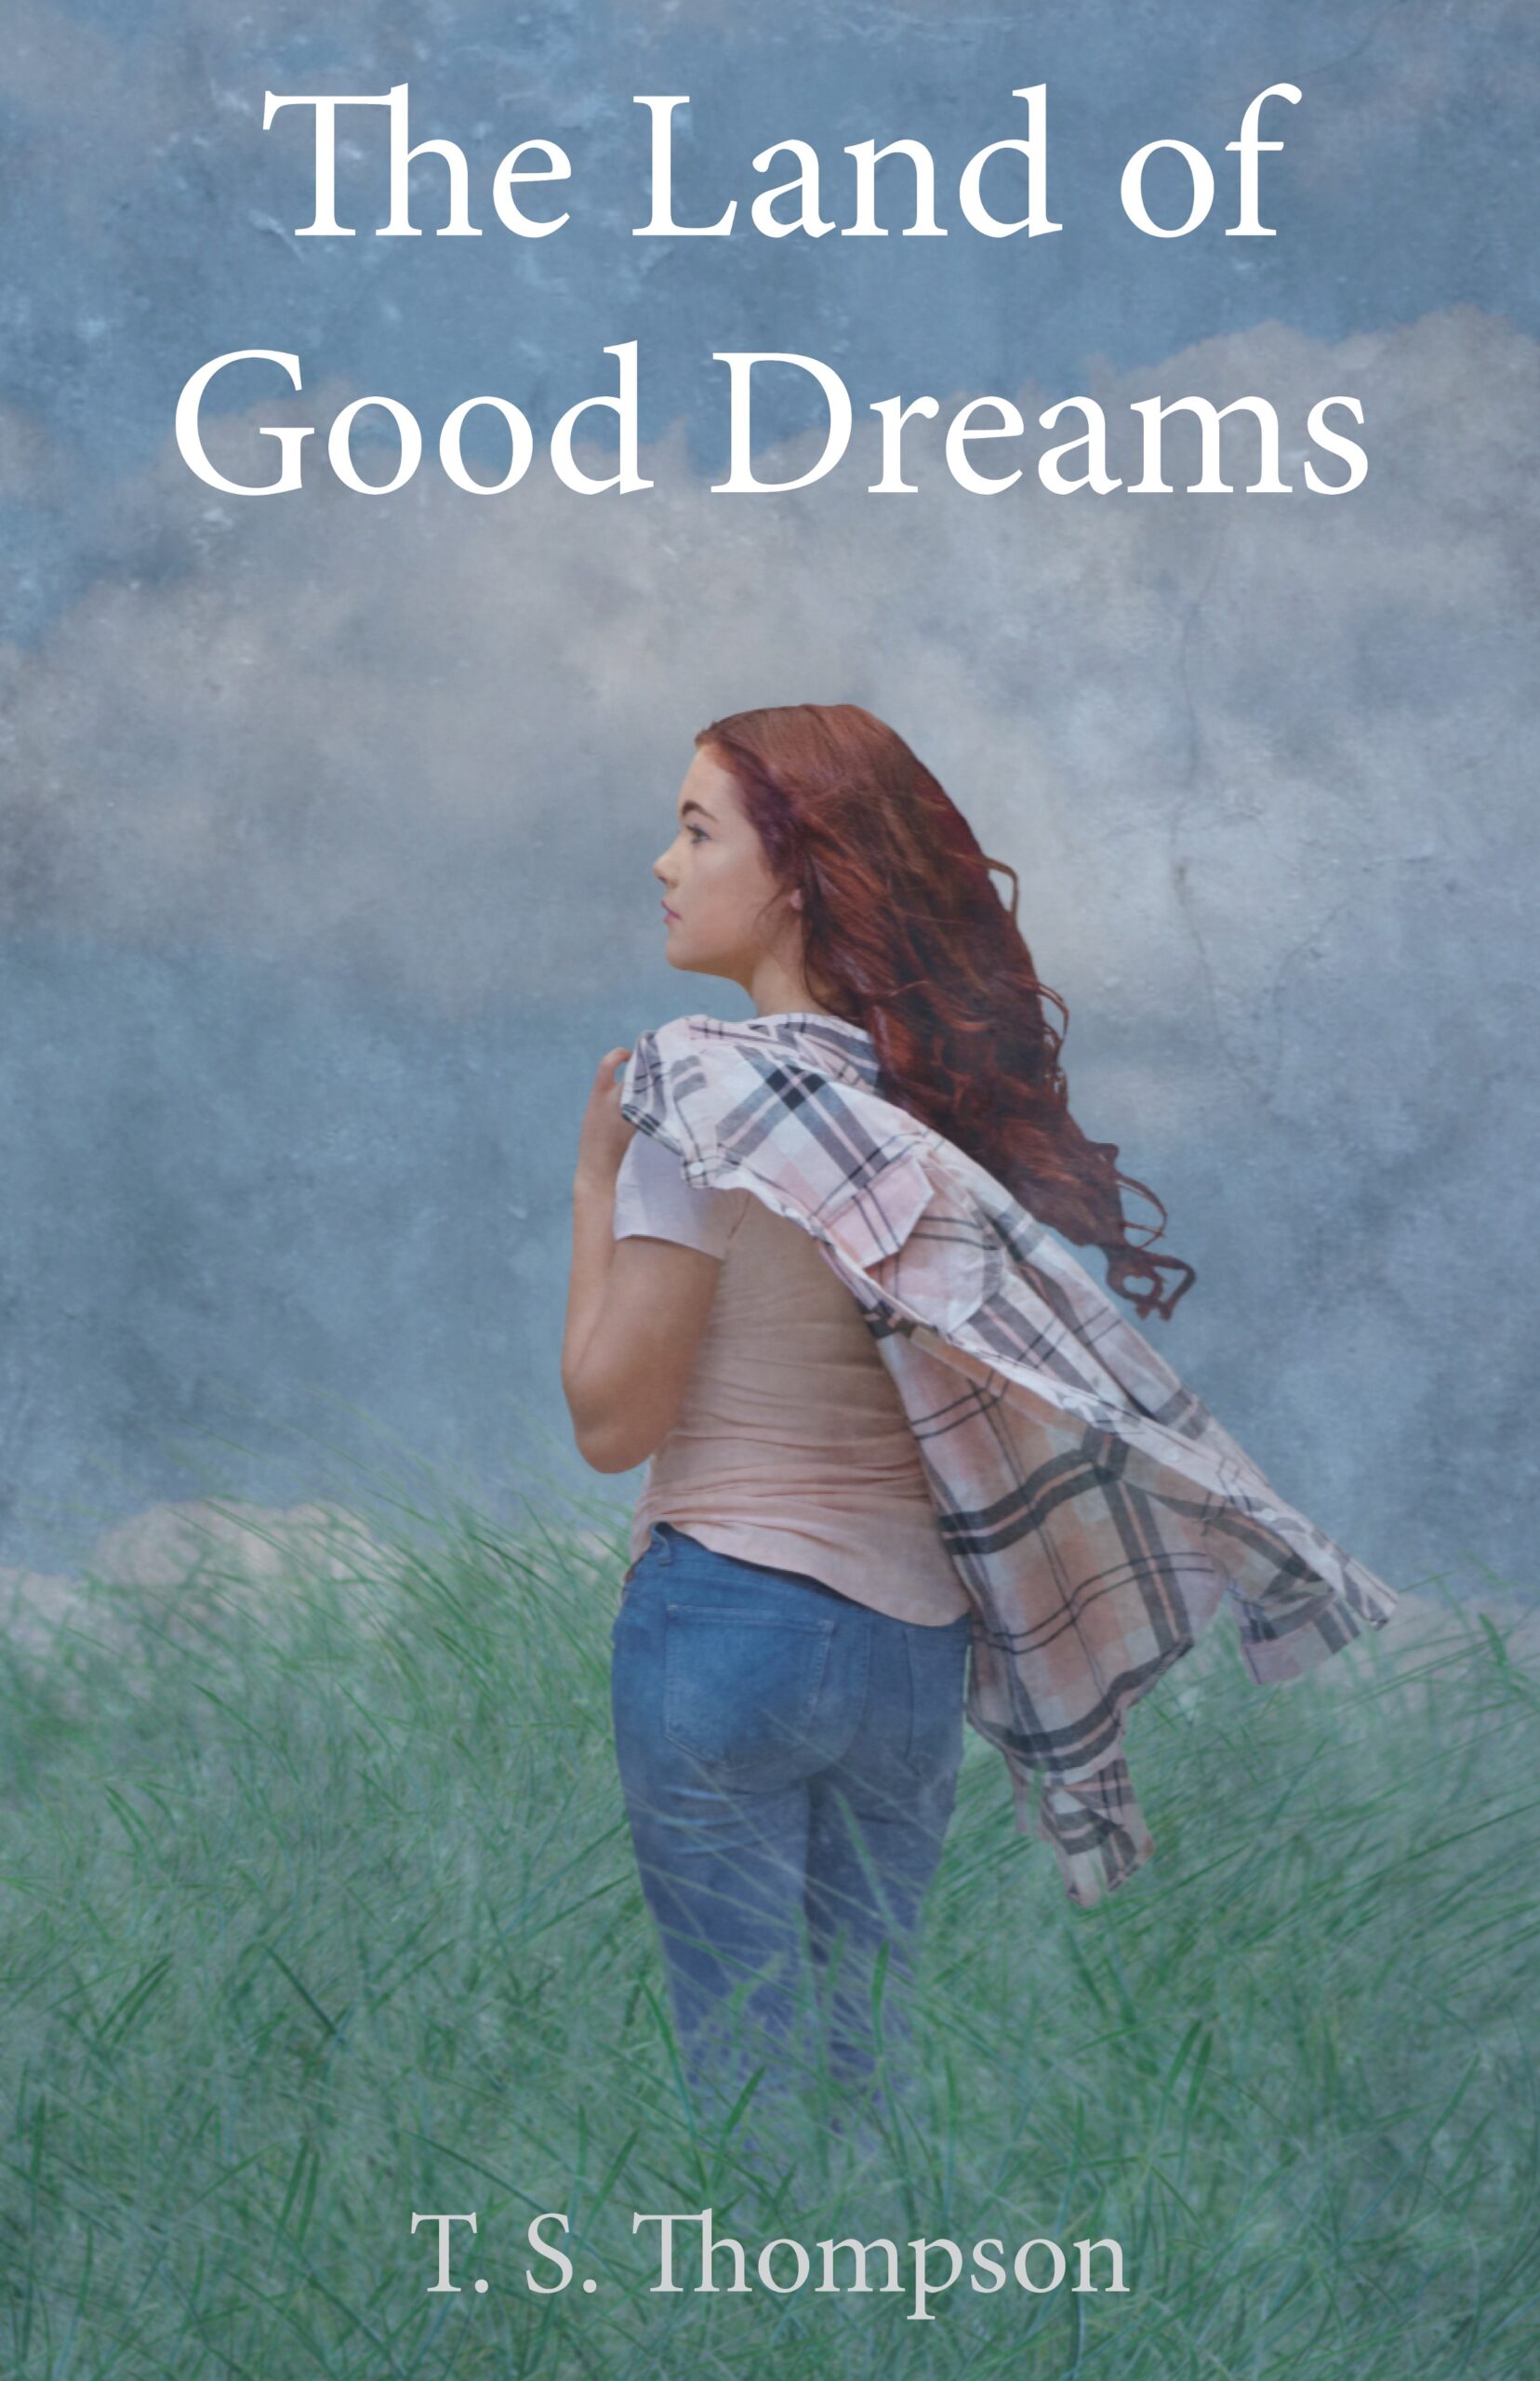 FREE: The Land of Good Dreams by T. S. Thompson